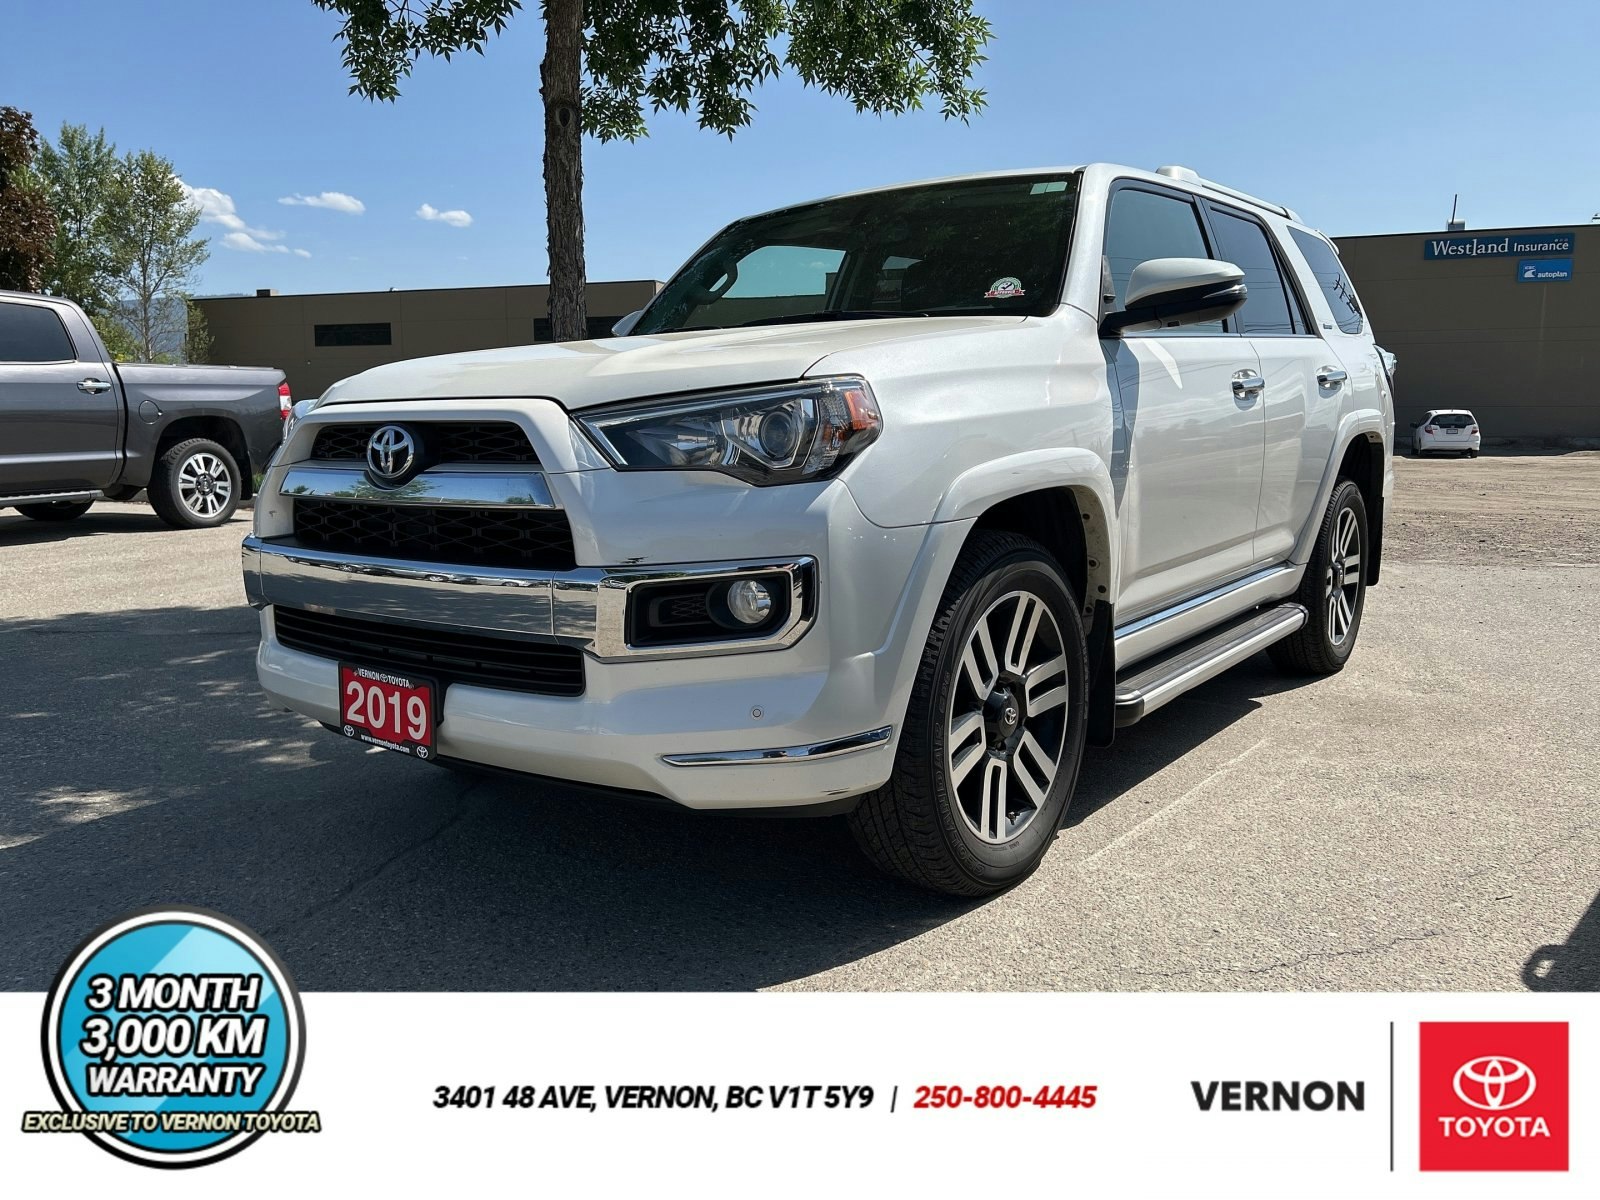 2019 Toyota 4Runner LIMITED AWD | LEATHER | ROOF RAILS | HITCH (H6411) Main Image